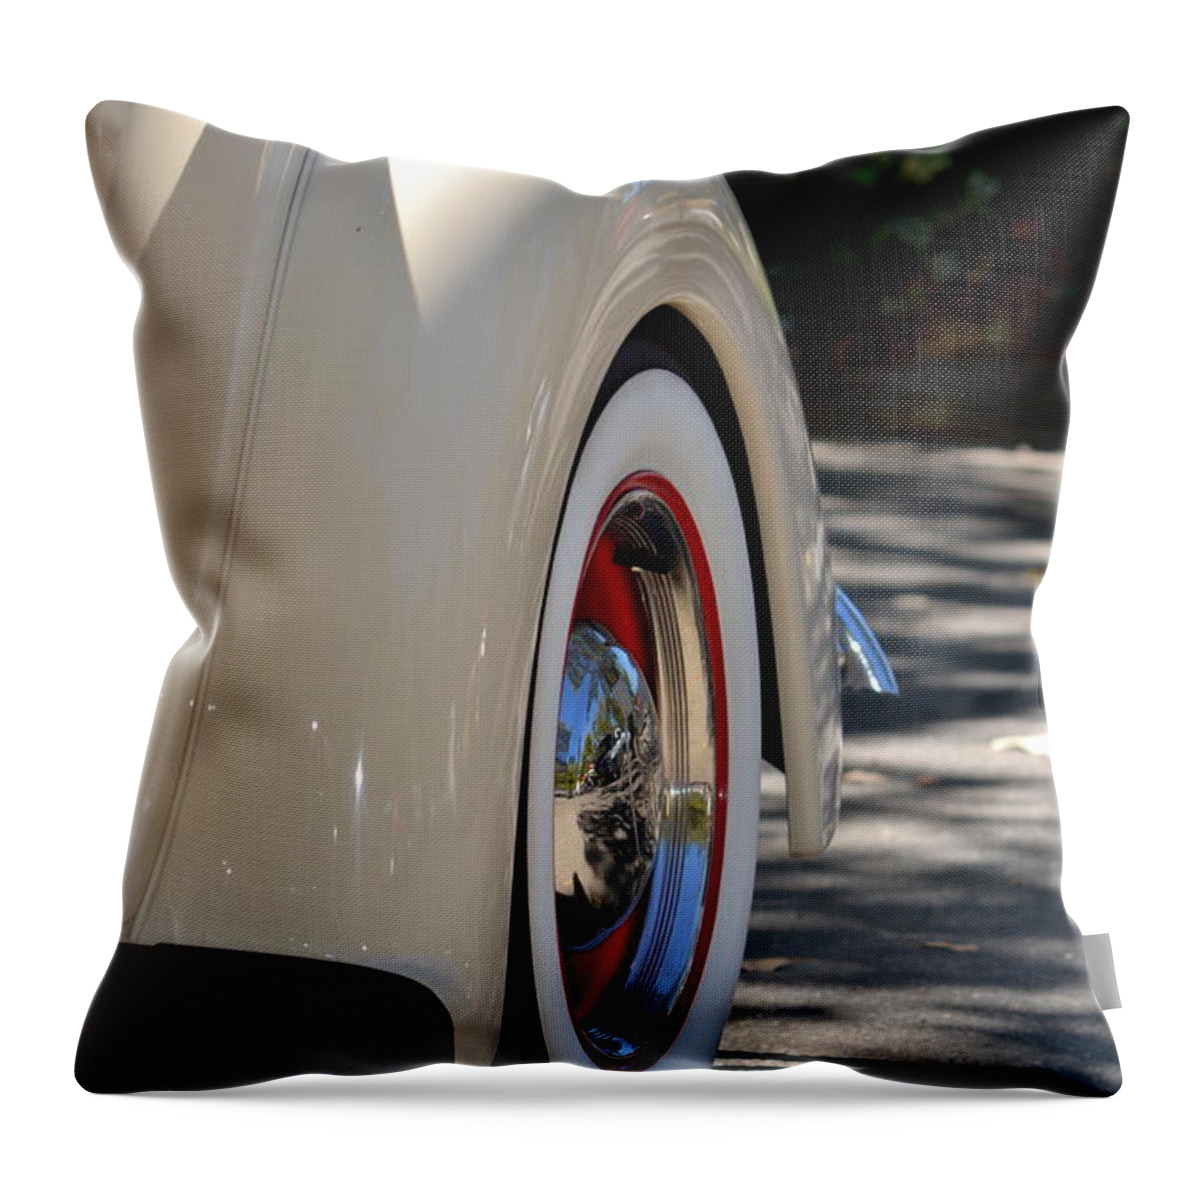  Throw Pillow featuring the photograph Ford Fender by Dean Ferreira